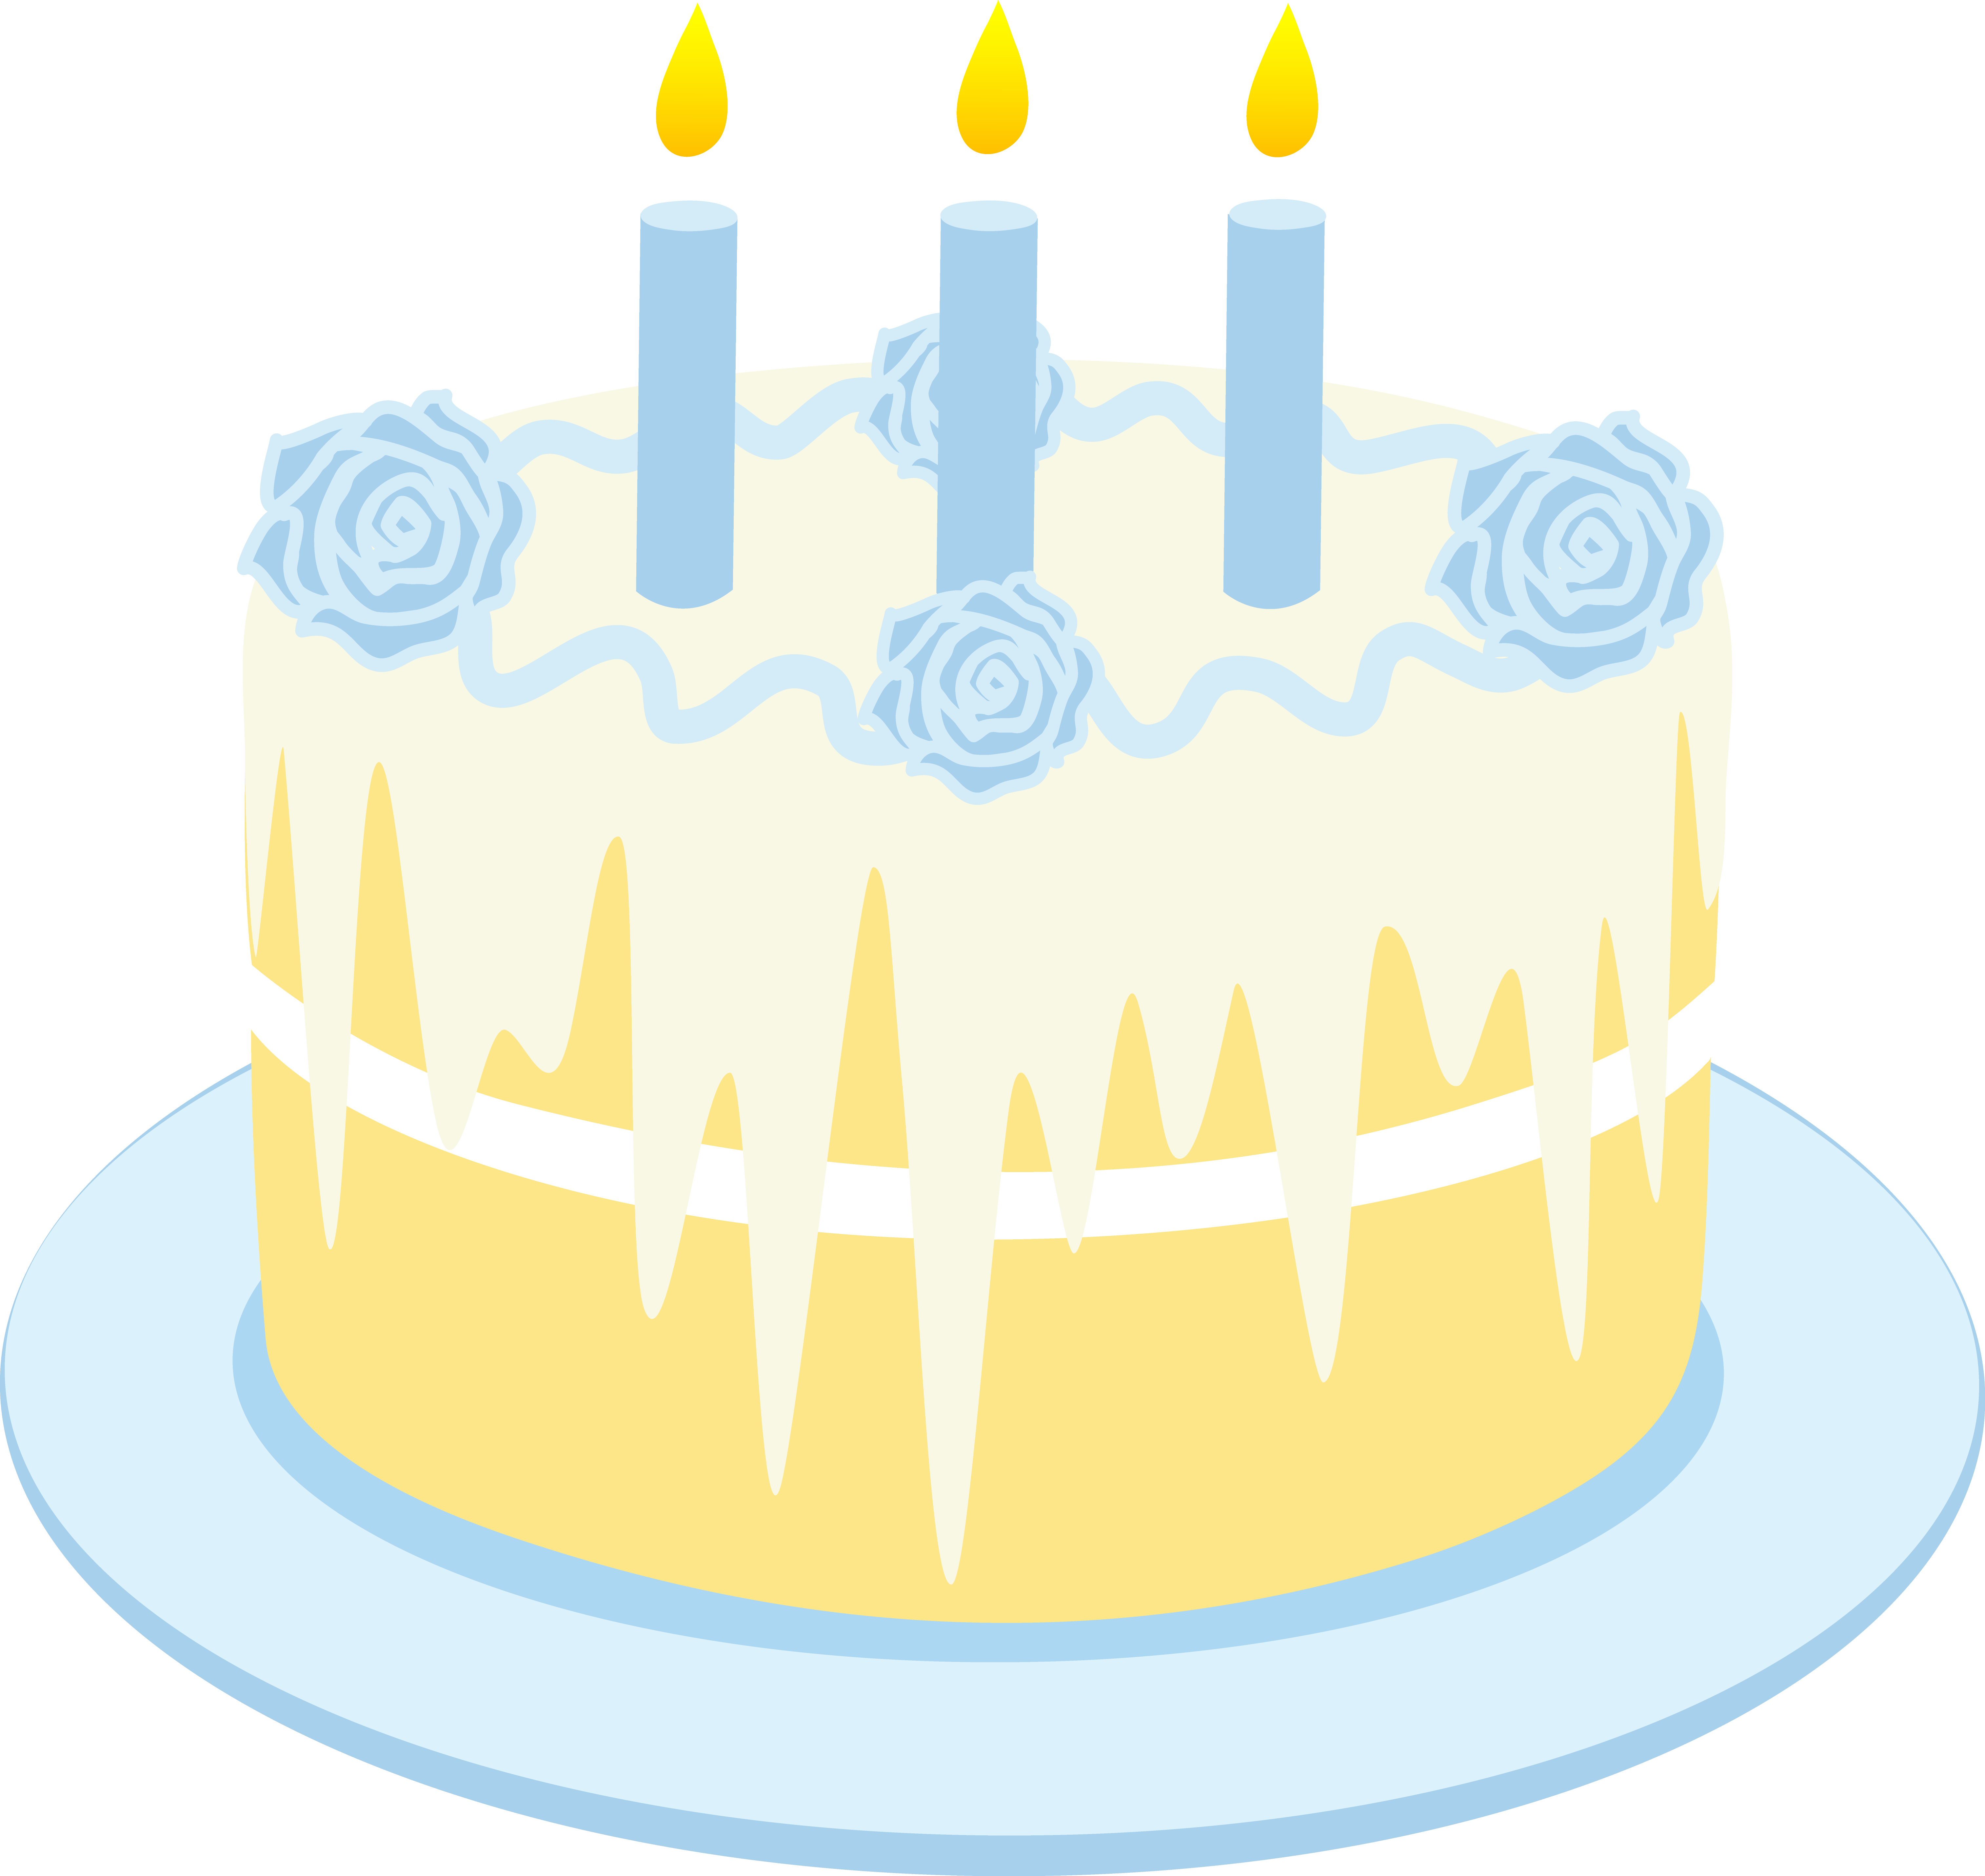 Free Clipart Birthday Cake With Candles